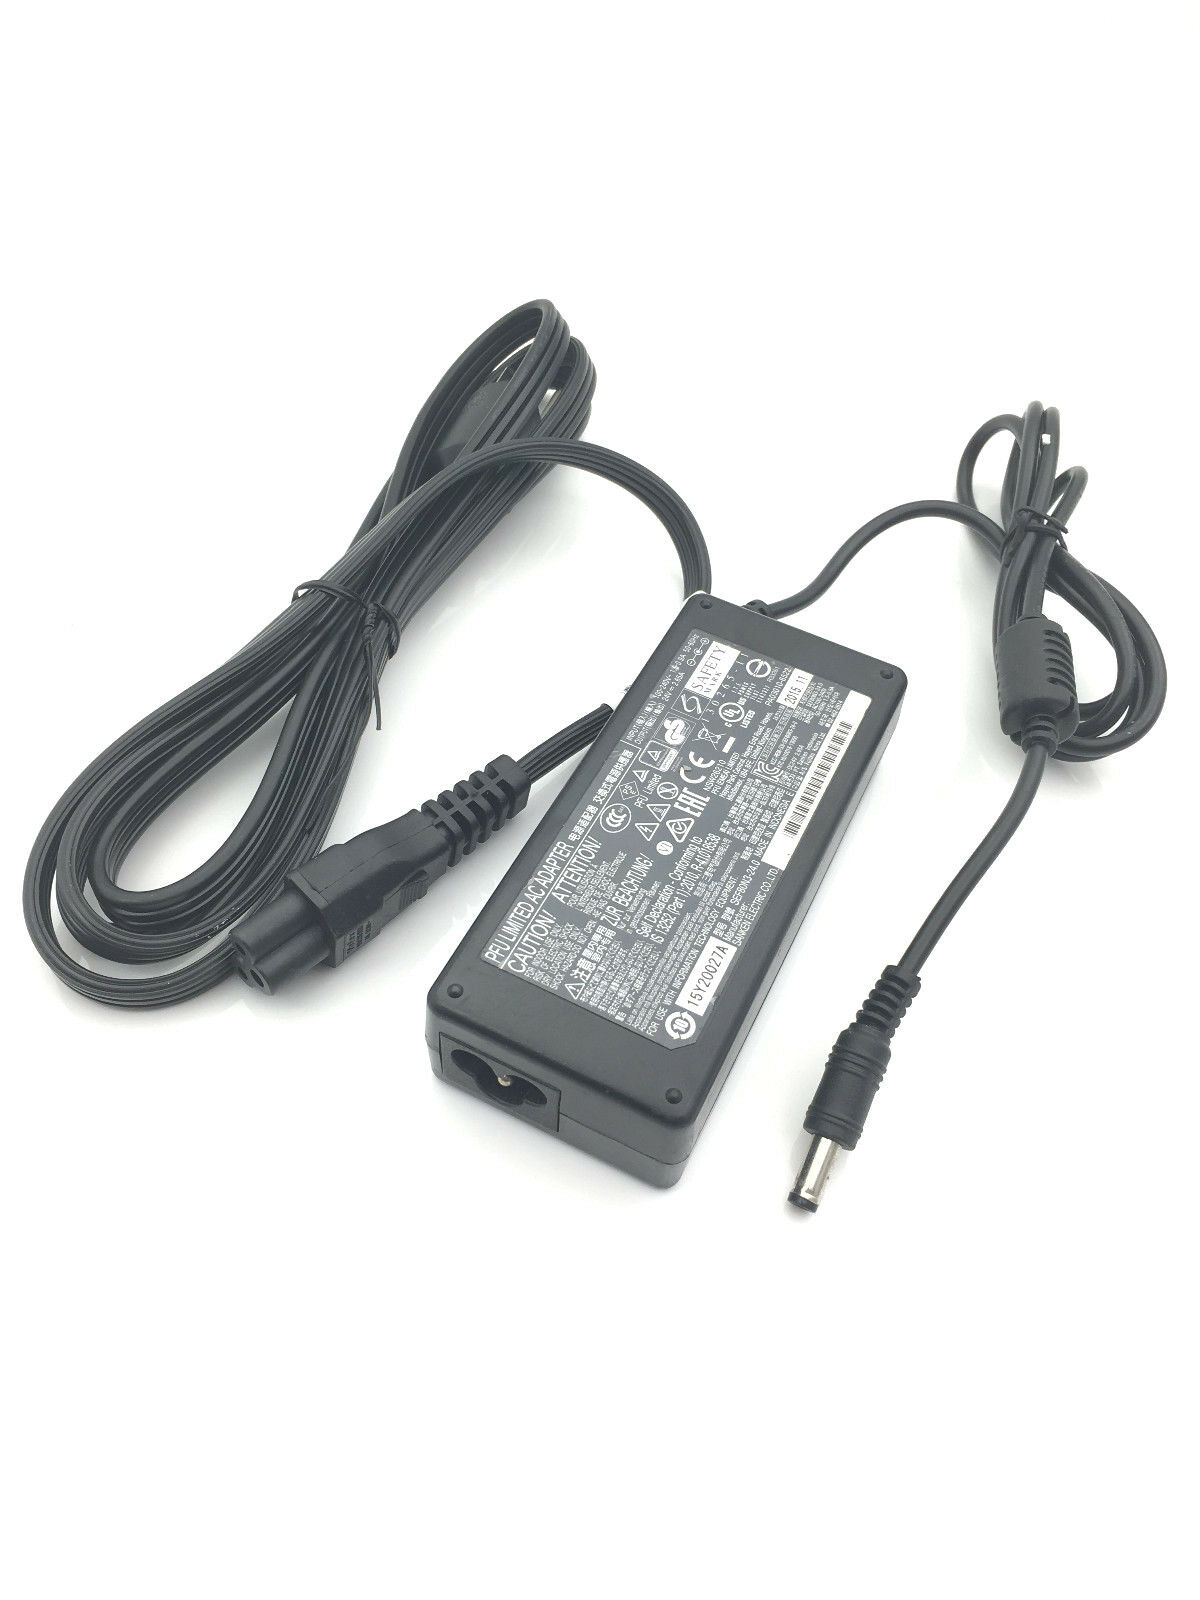 PA03540-K909 for Fujitsu Fi-6130 Fi-6140 6230 6240 AC Power Adapter Power Cord MPN: Does Not Apply Compatible Brand: